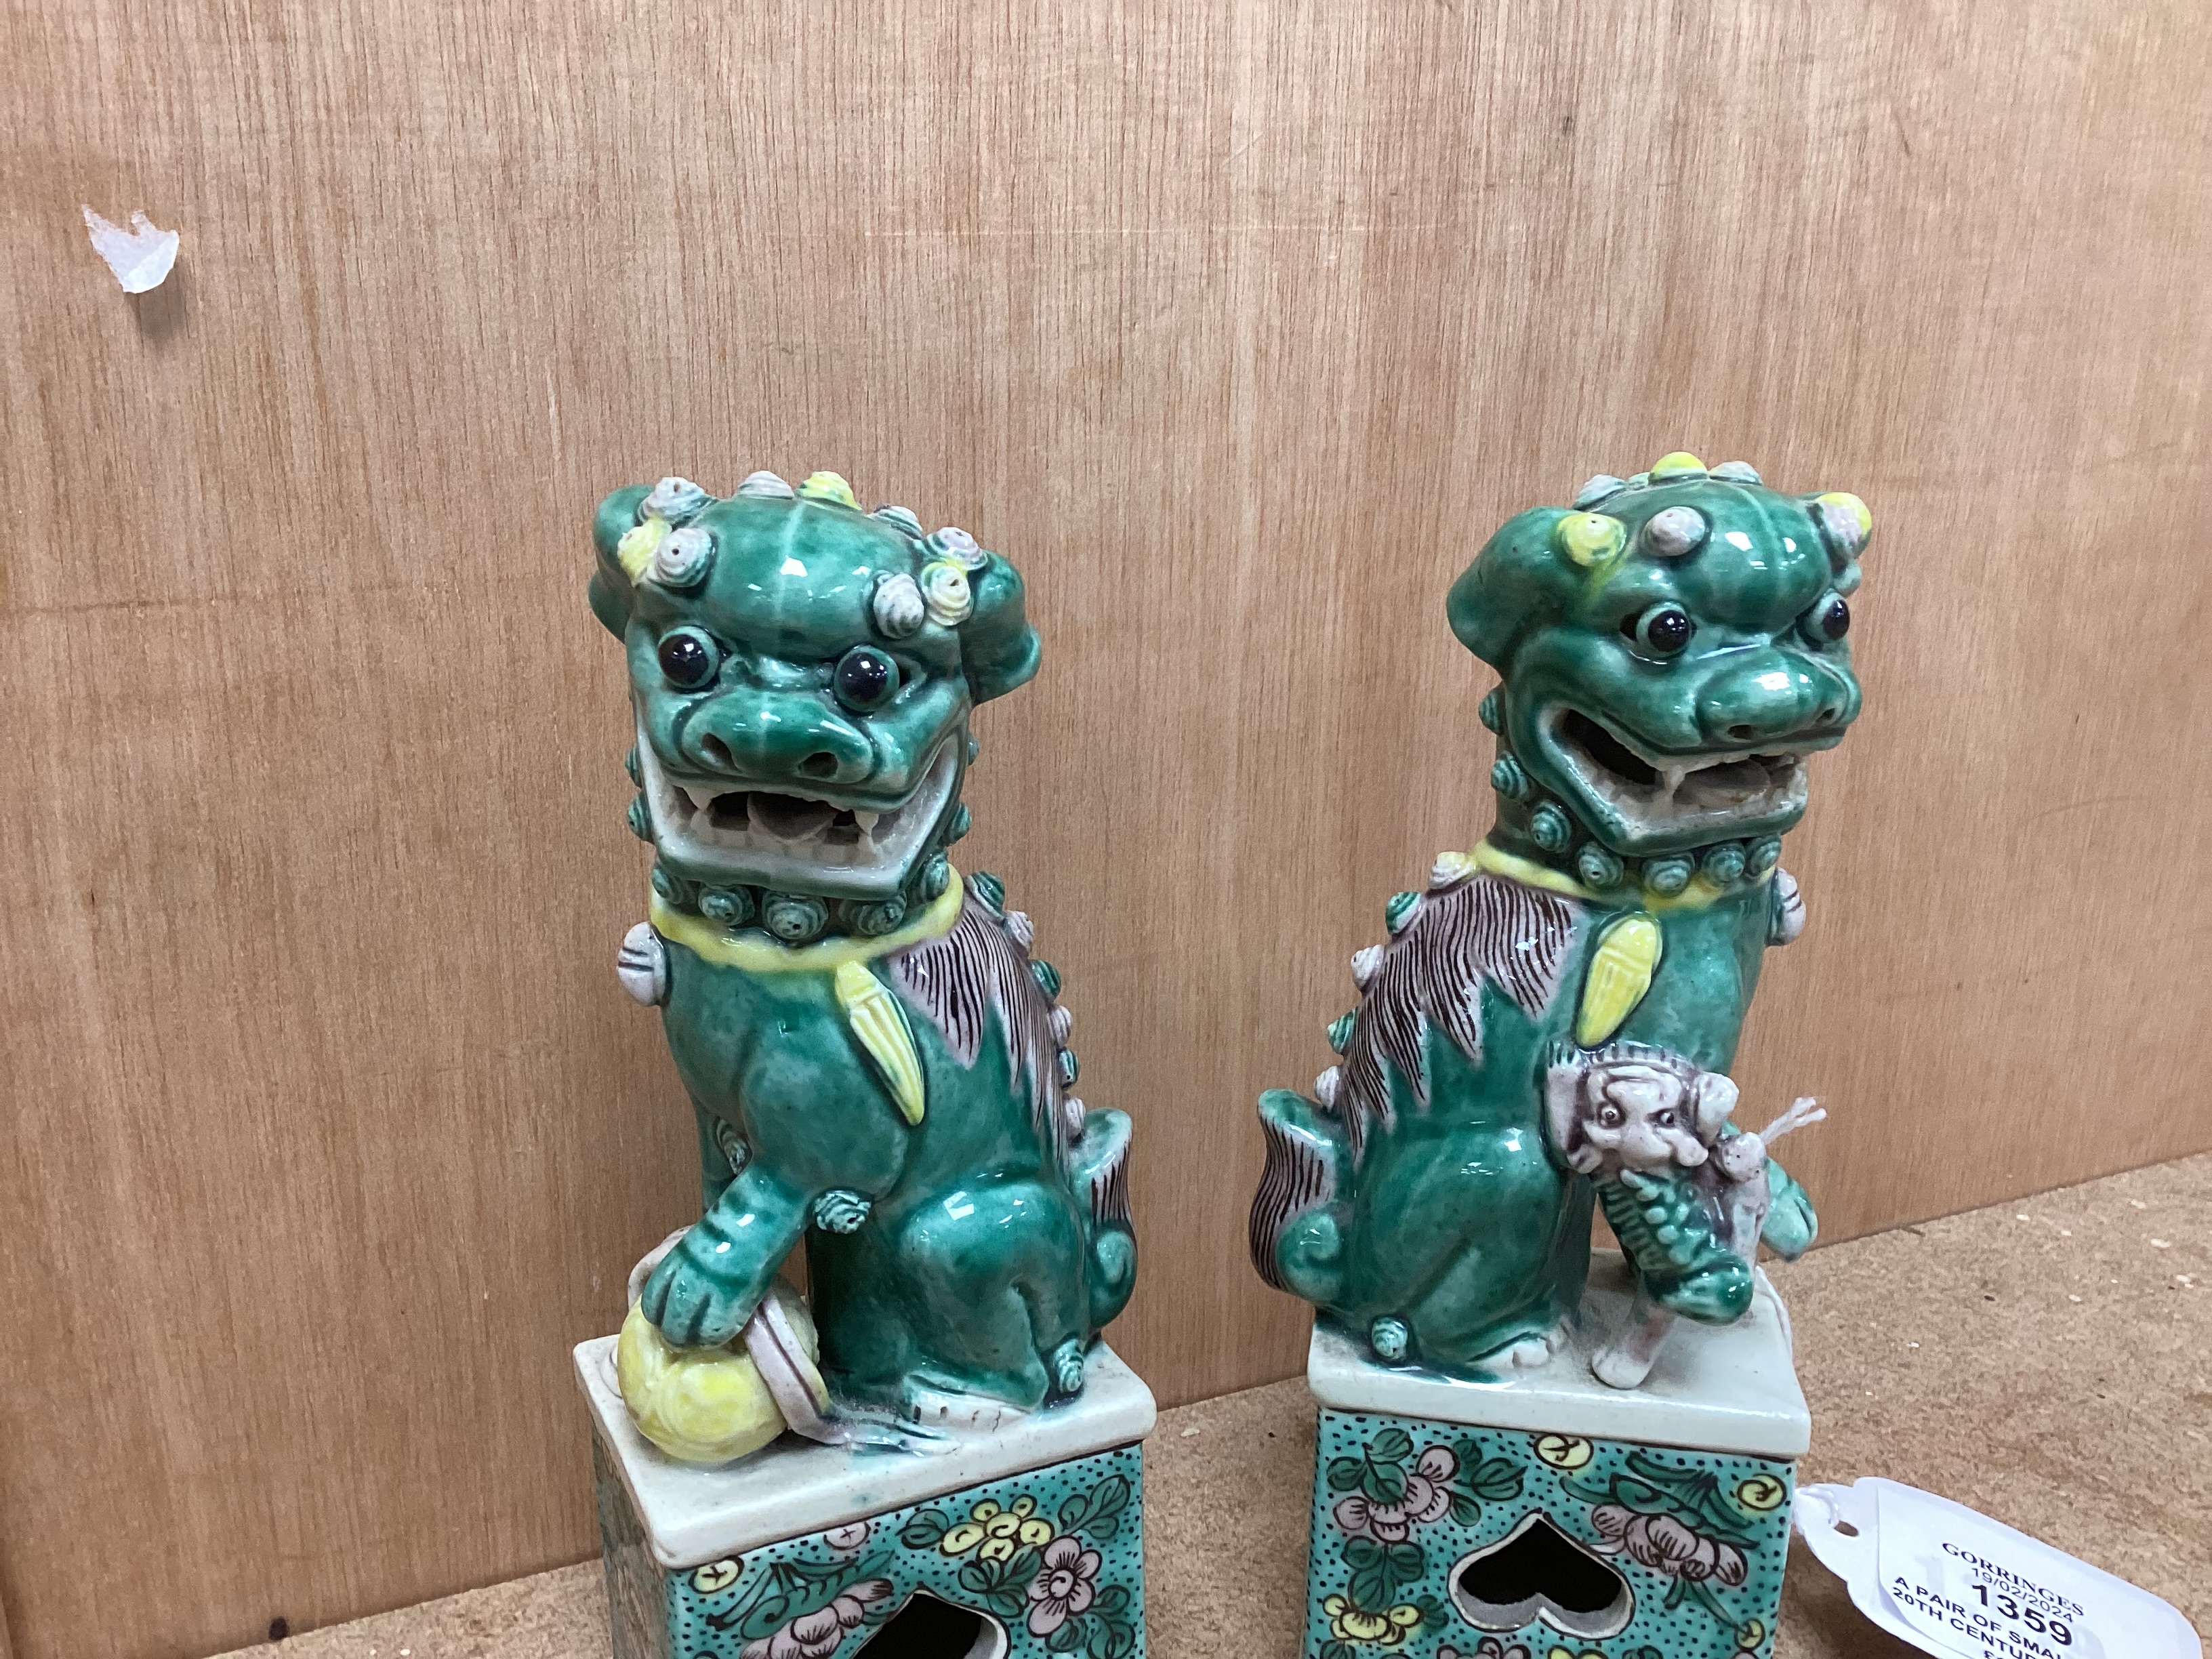 A pair of small early 20th century Chinese figures of Buddhist lions, 15.5cm high